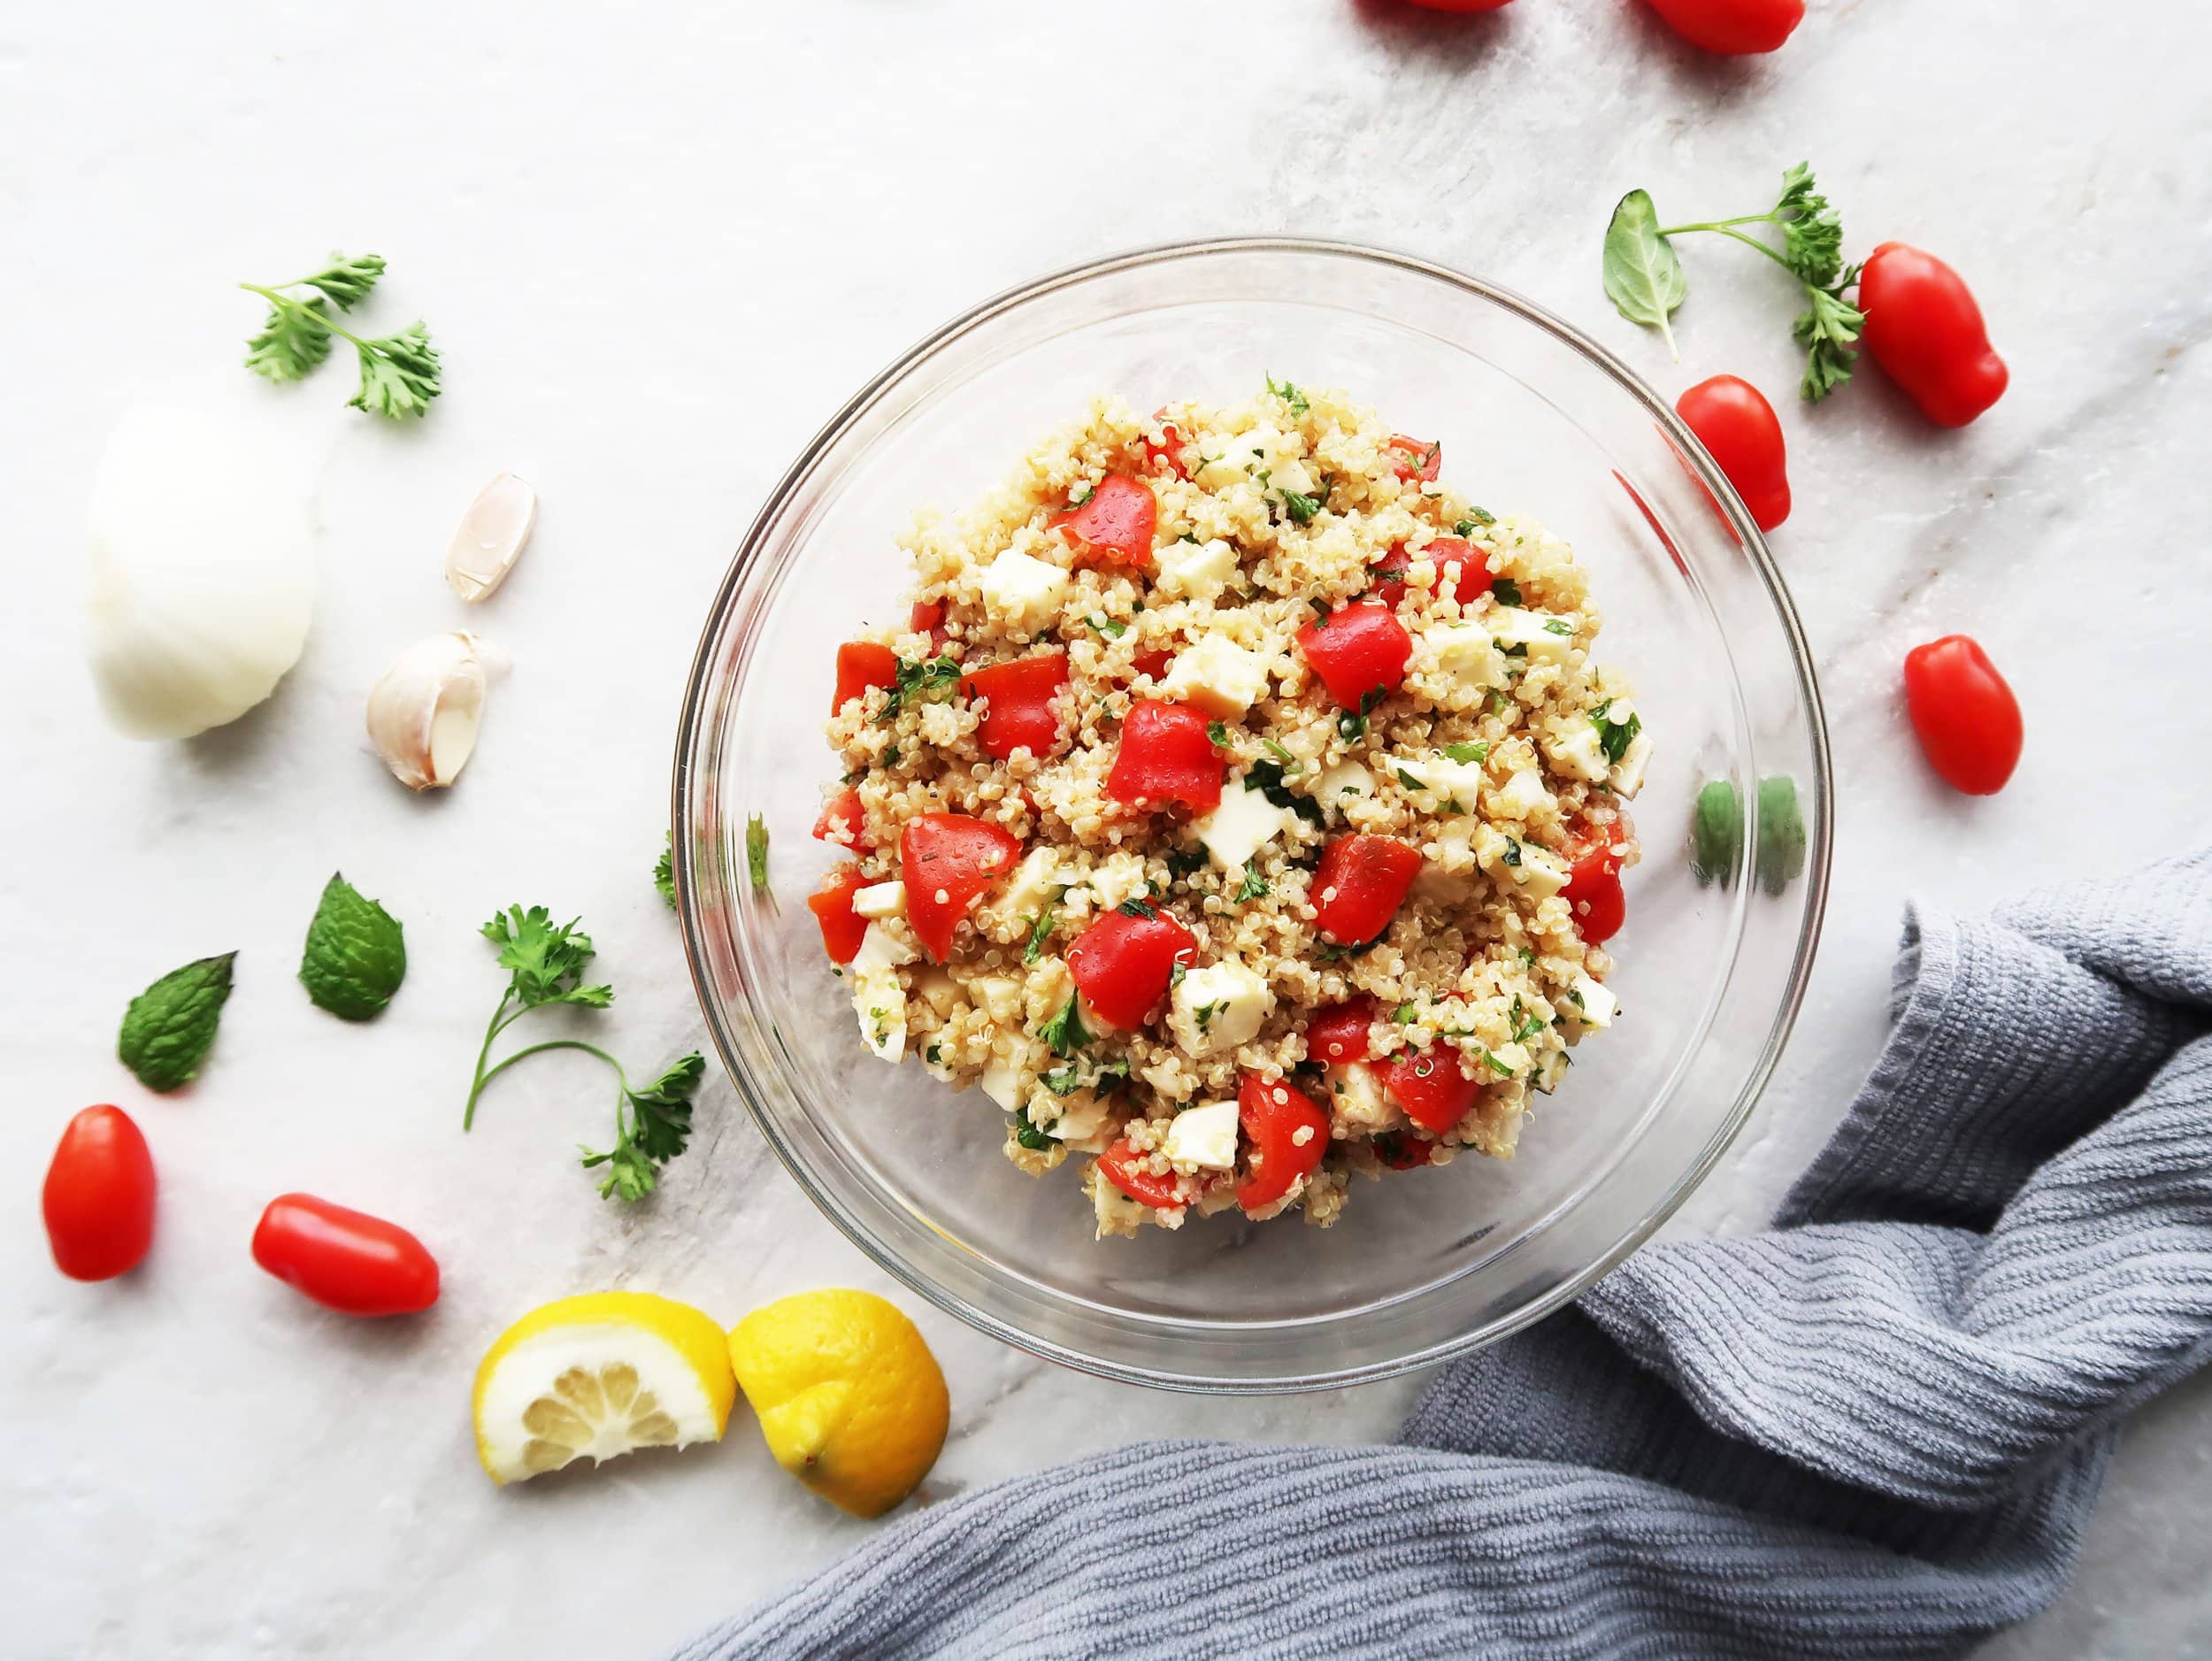 Fresh Tomato, Mozzarella, and Herb Quinoa Salad surrounded by ingredients.